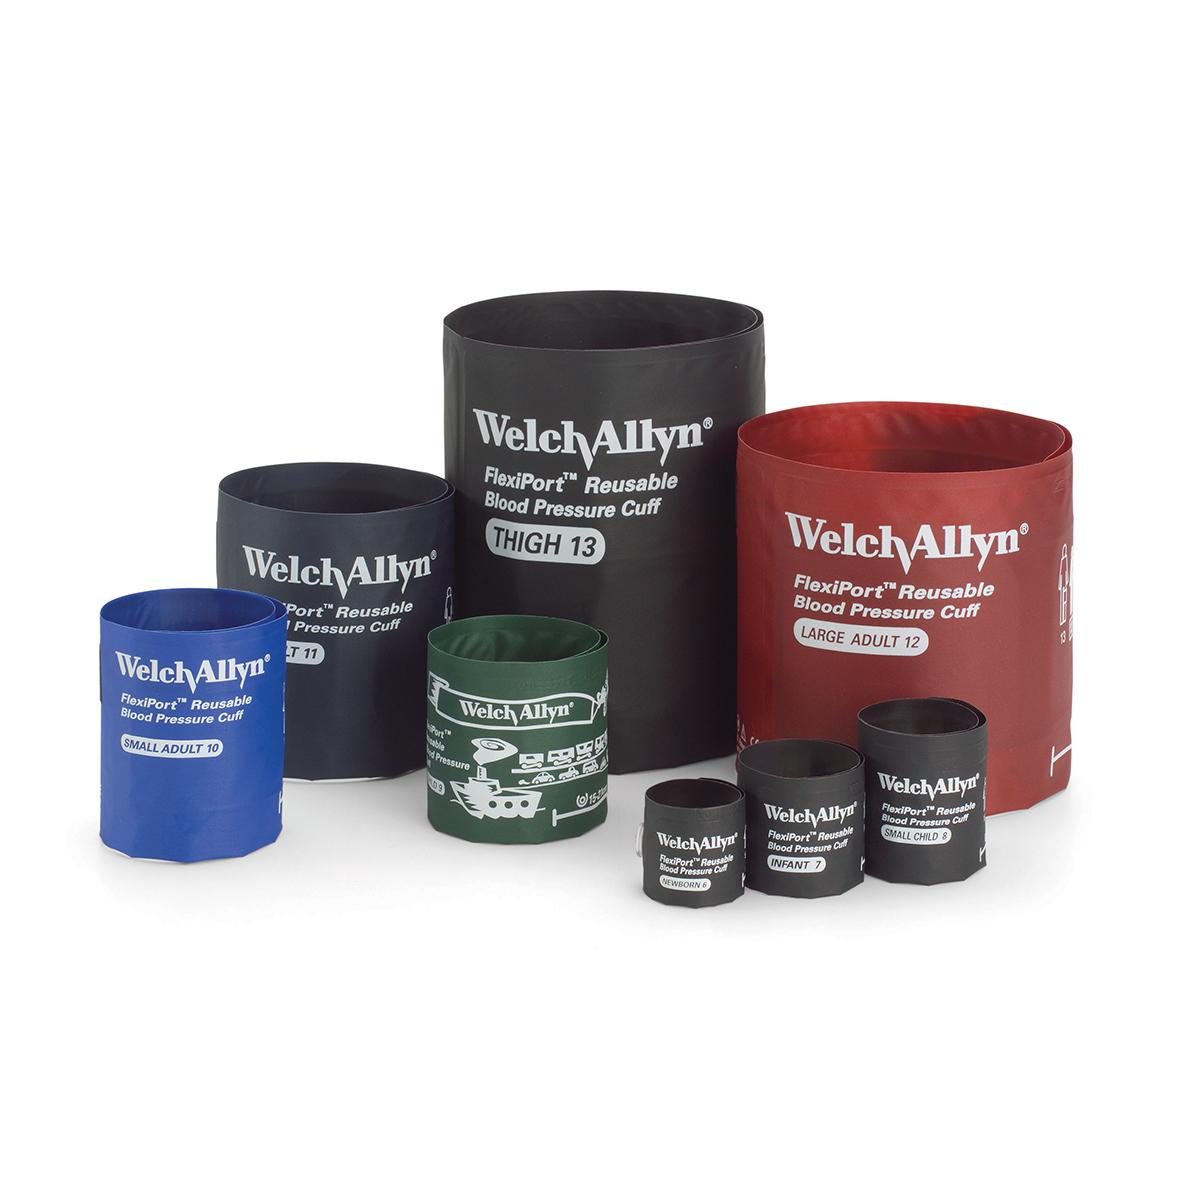 Welch Allyn FlexiPort Reusable Blood Pressure Cuffs are shown in a variety of sizes and corresponding colors